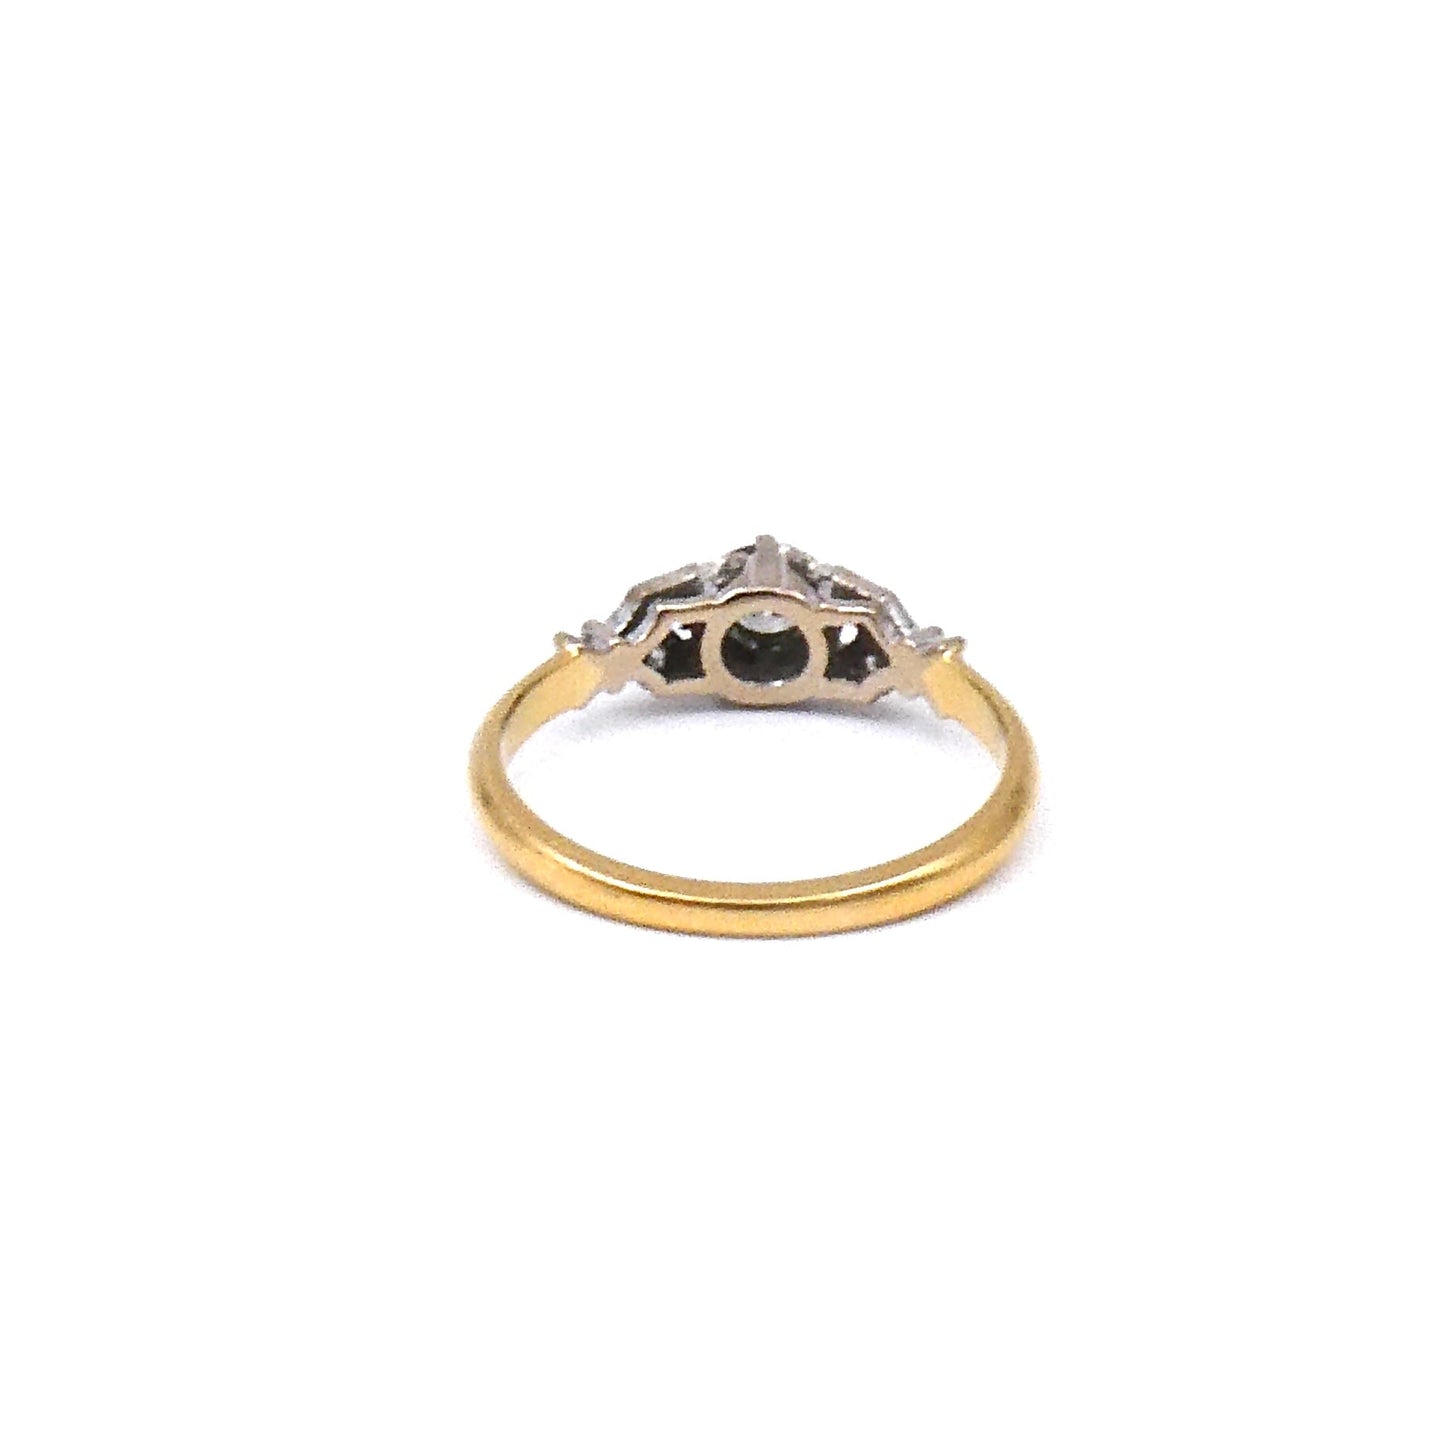 A diamond ring set in a platinum leaf design in 18kt gold, a beautiful vintage diamond ring. - Collected